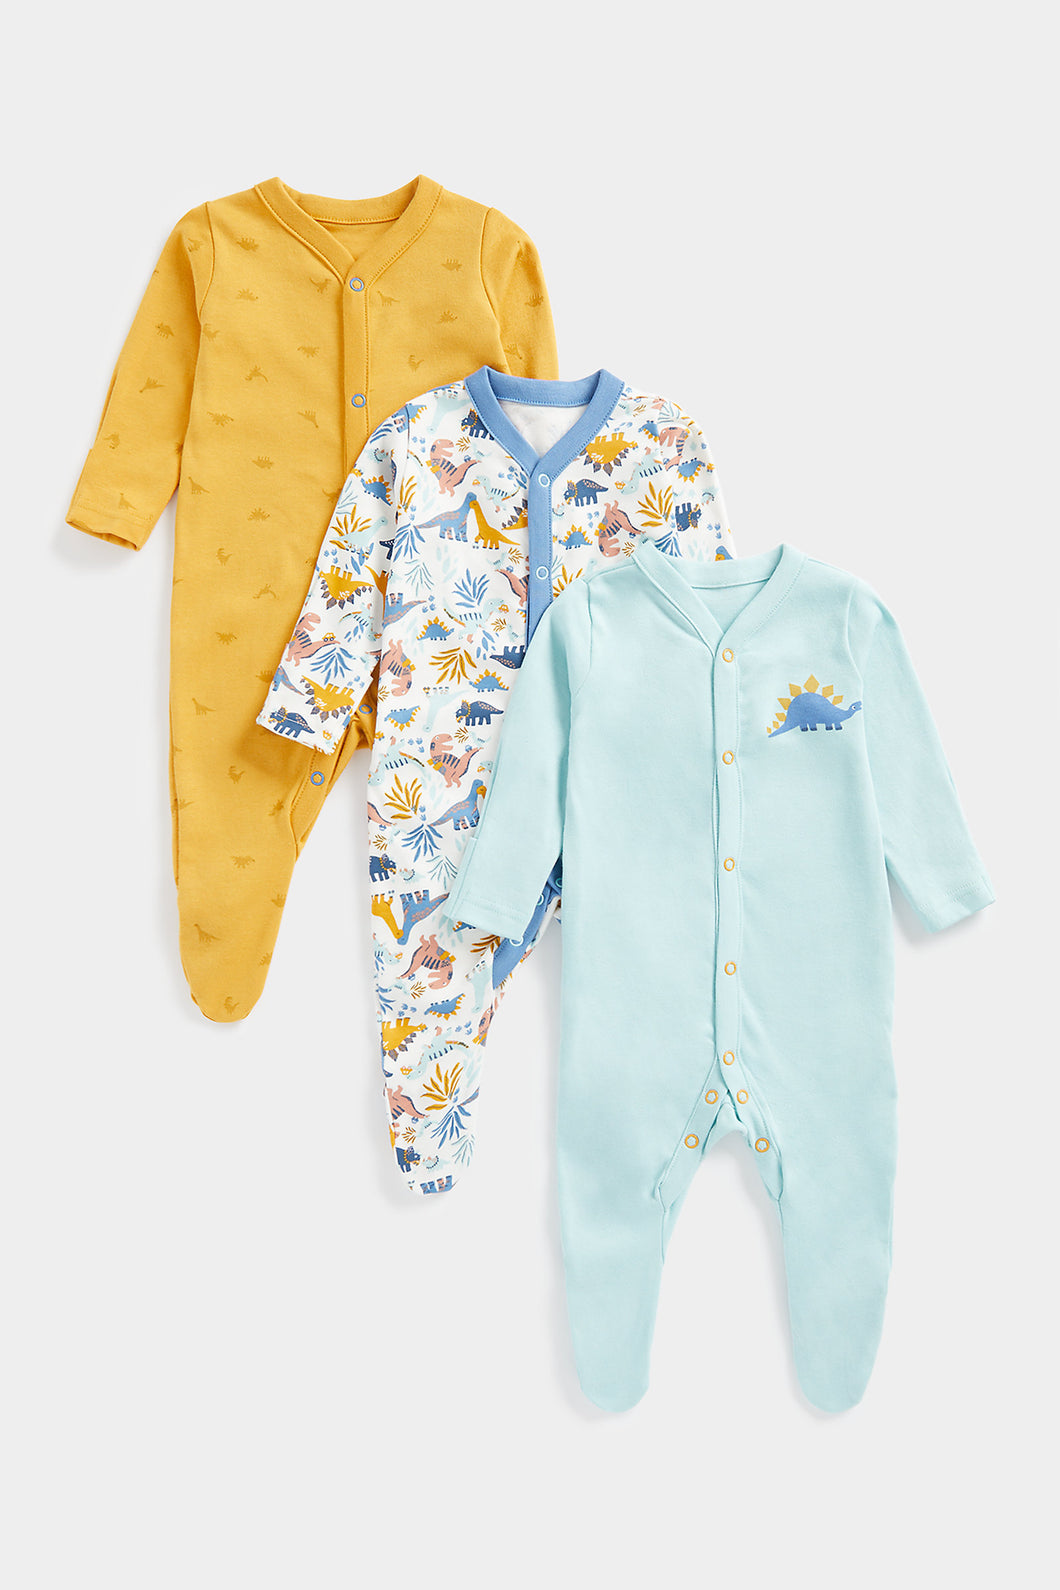 Mothercare Dino Sleepsuits - 3 Pack